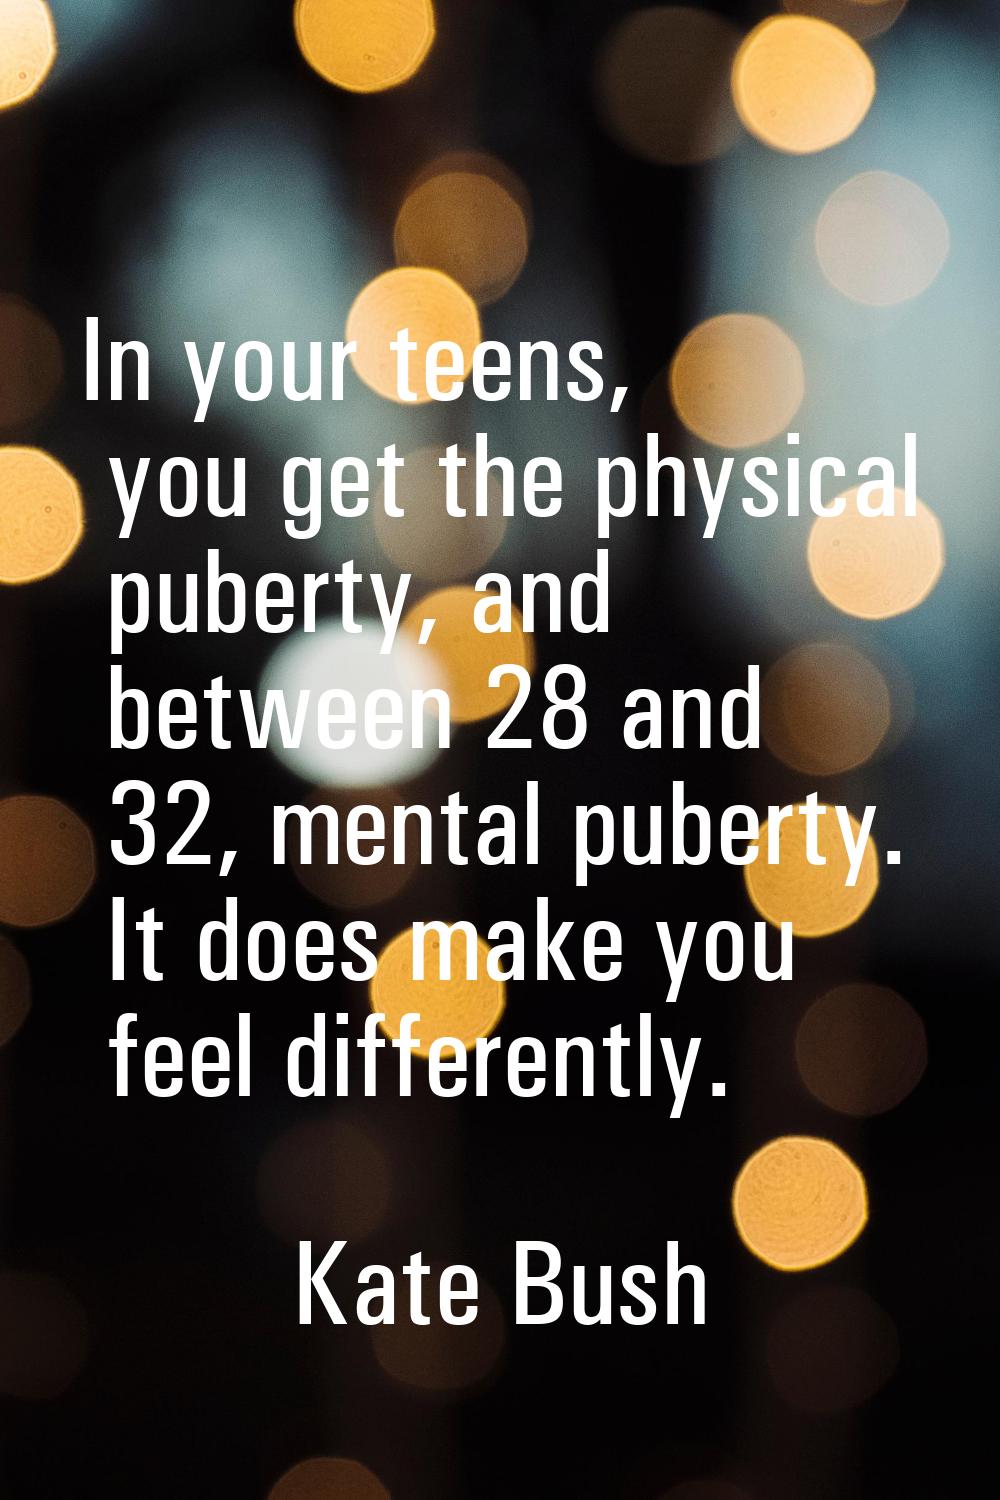 In your teens, you get the physical puberty, and between 28 and 32, mental puberty. It does make yo